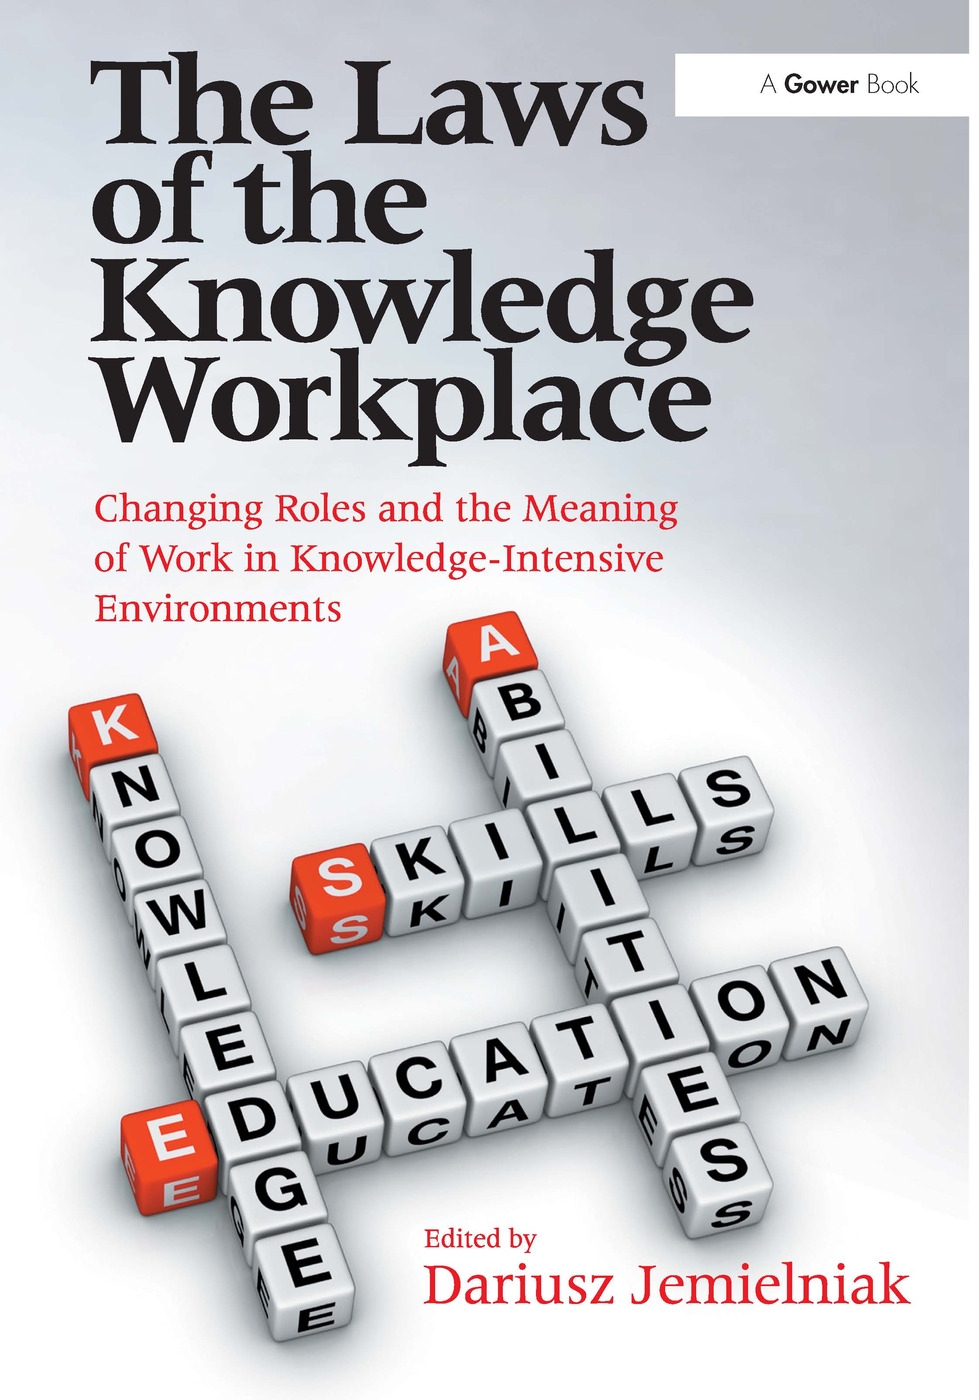 The Laws of the Knowledge Workplace: Changing Roles and the Meaning of Work in Knowledge-intensive Environments